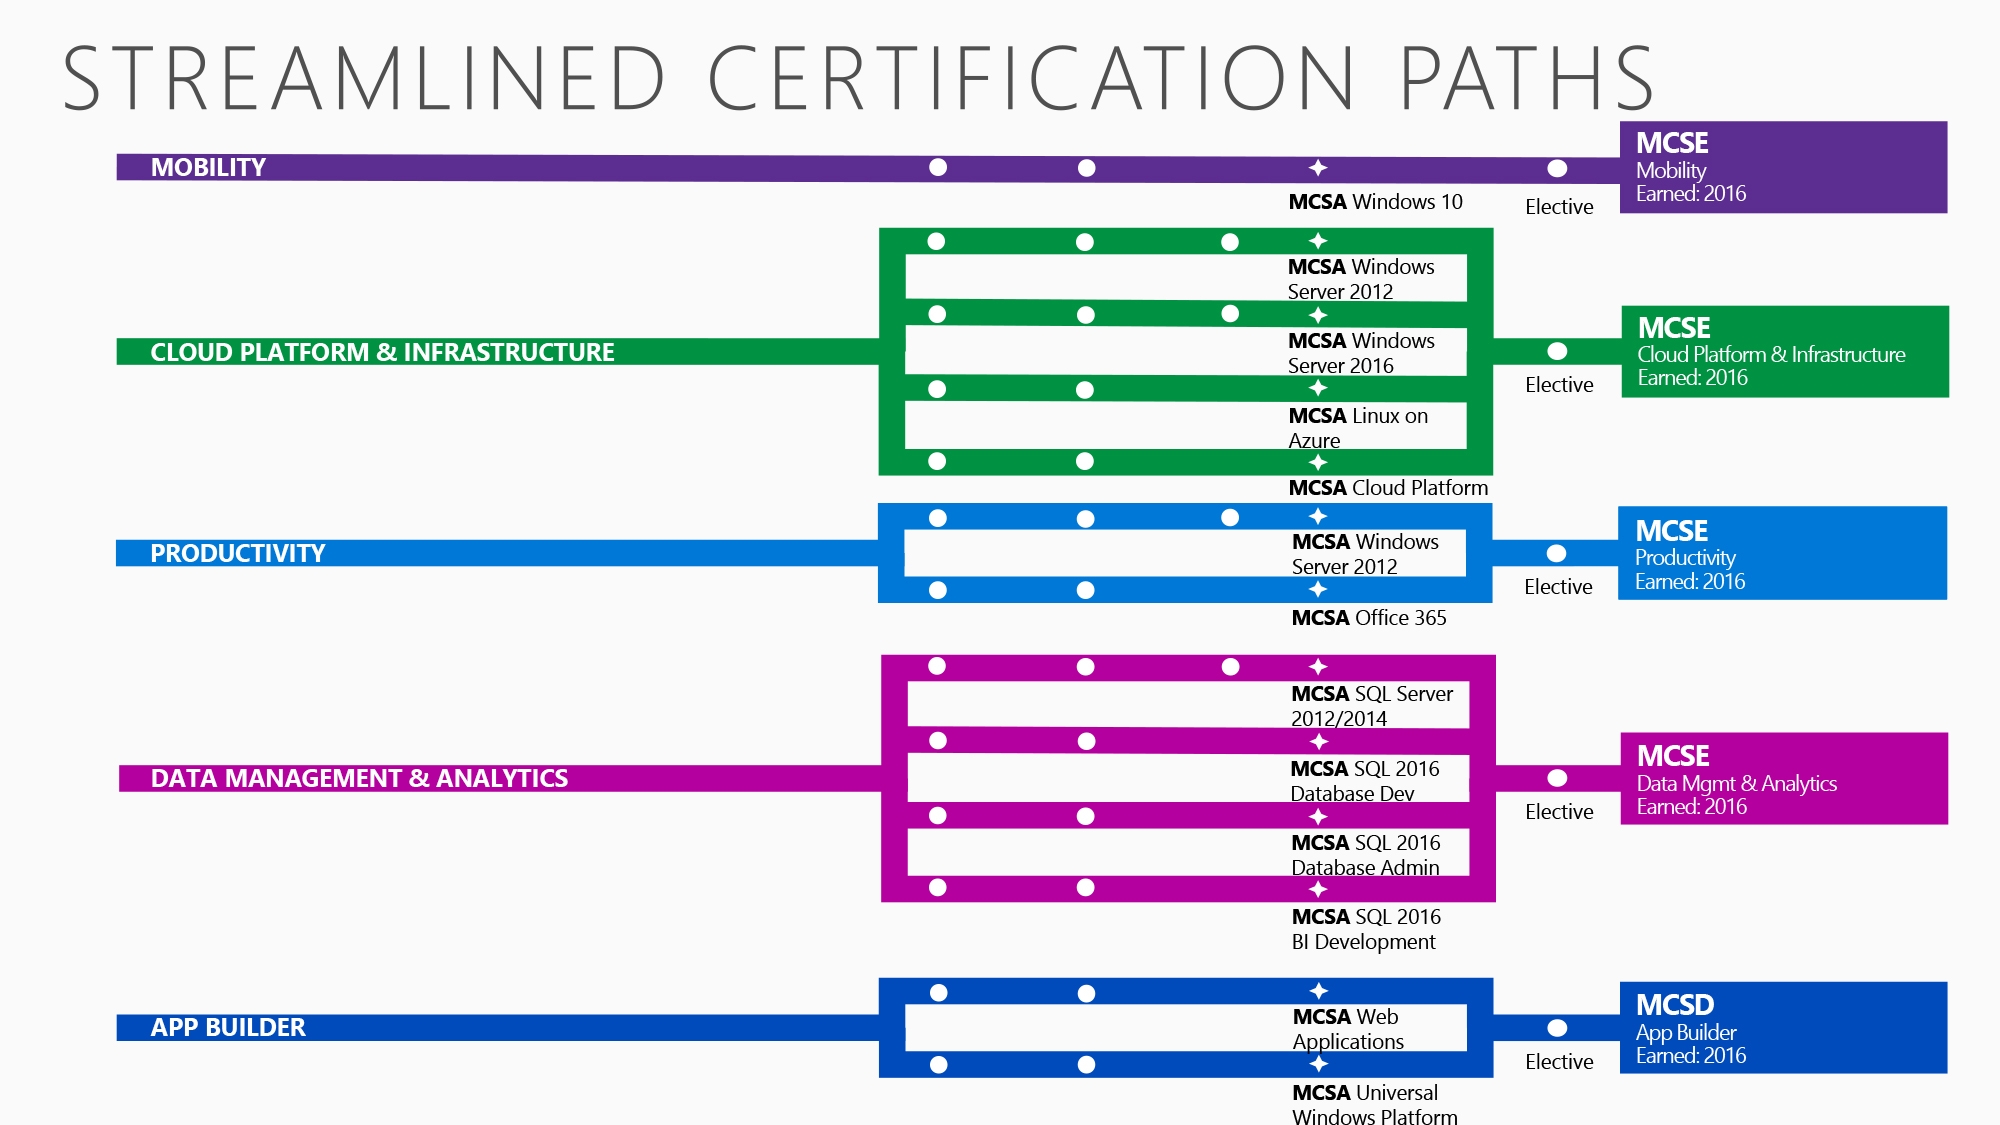 Certification paths